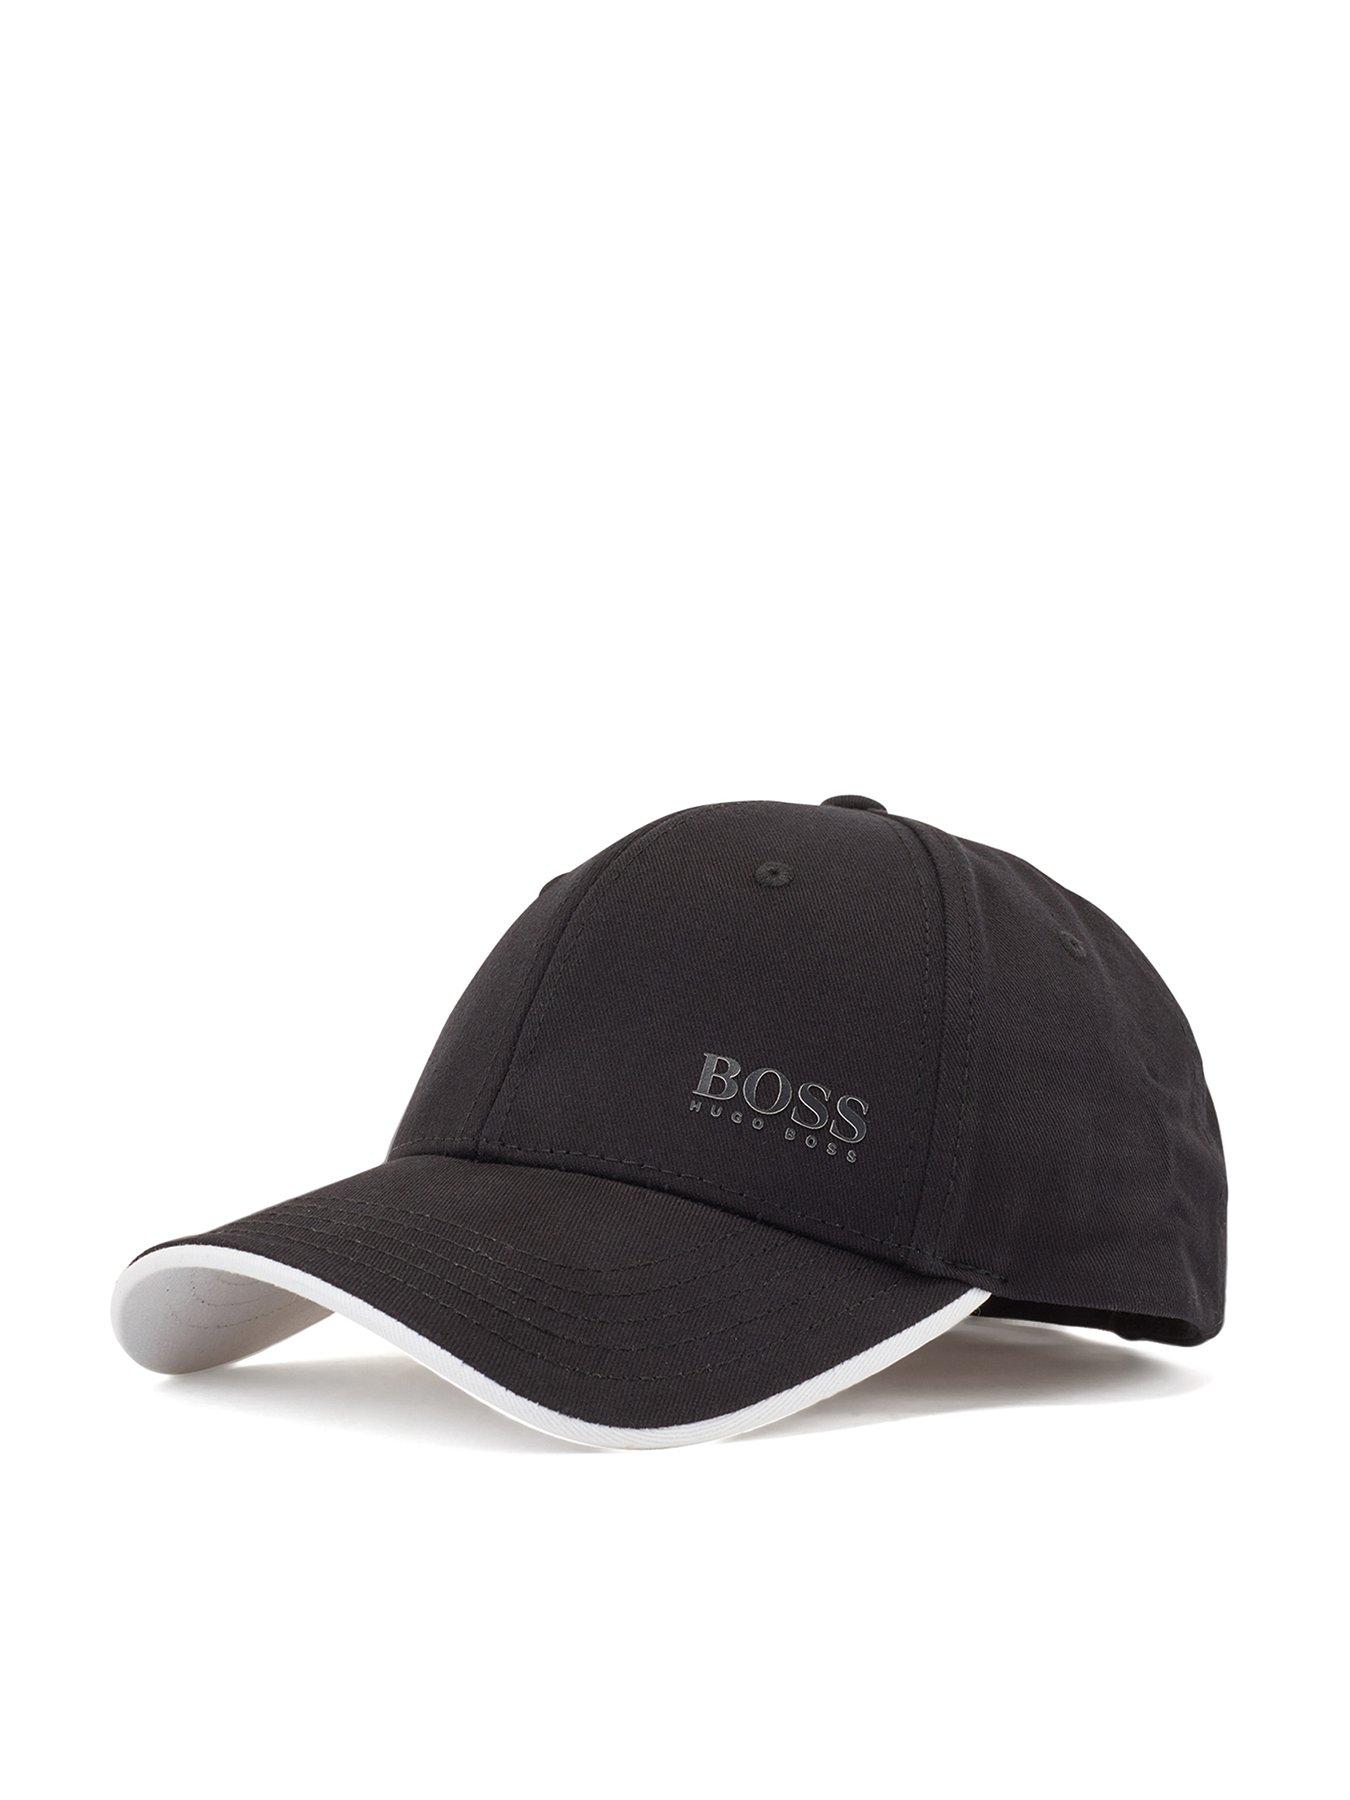 hugo boss next day delivery